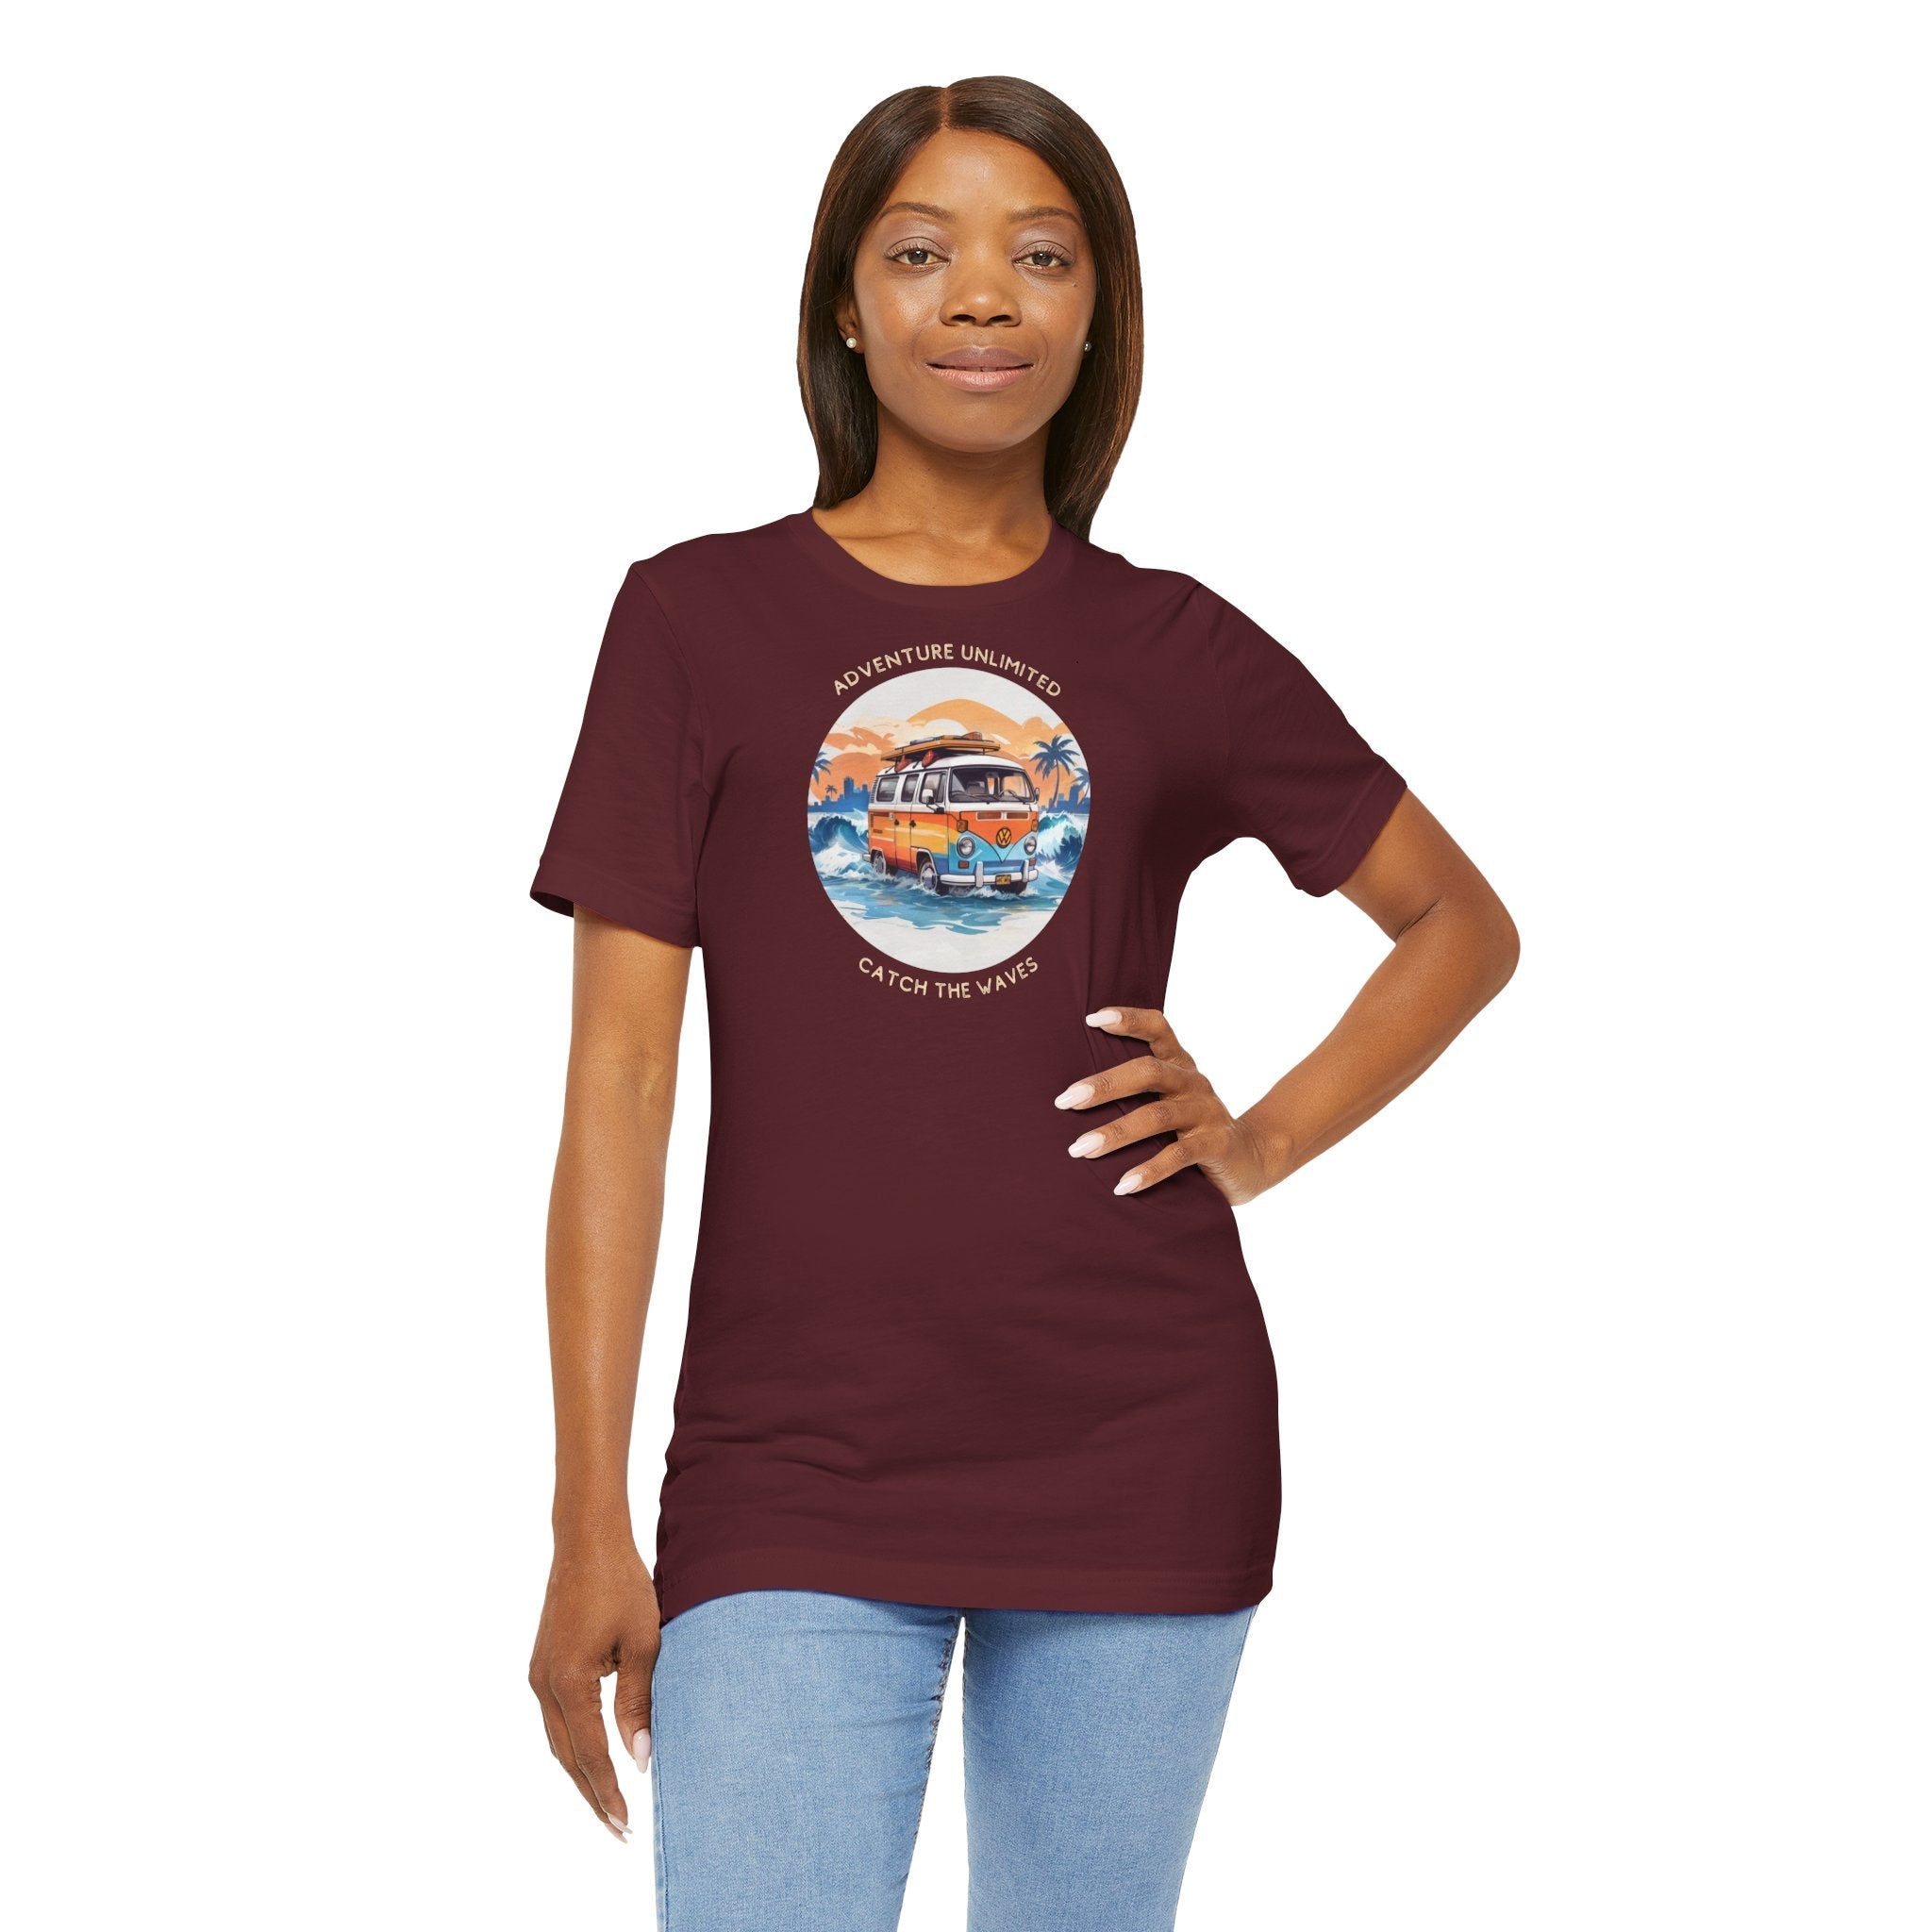 Woman wearing maroon Adventure Unlimited Surfing T-Shirt with ’Soulshinecreators’ printed on it